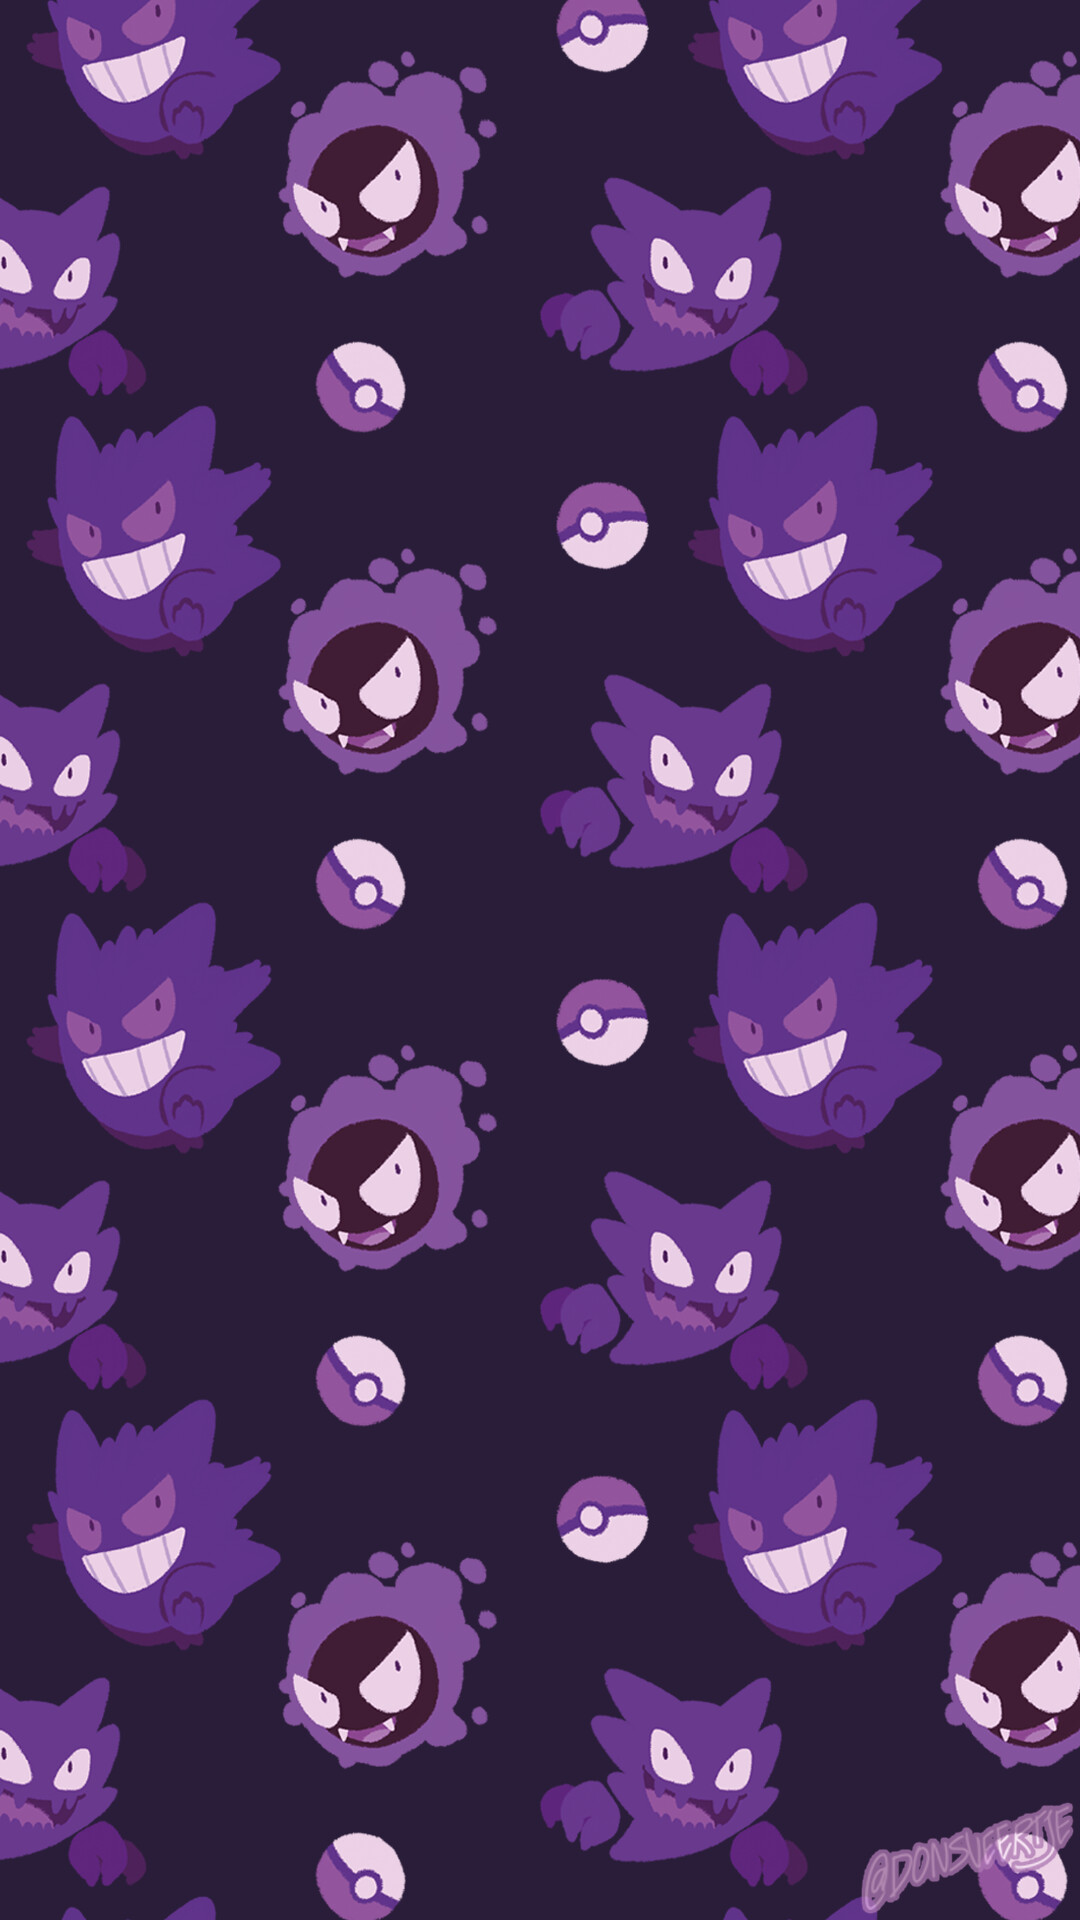 Ghost Pokemon: Gengar, A very mischievous, and at times, malicious species, The master of stealth. 1080x1920 Full HD Wallpaper.